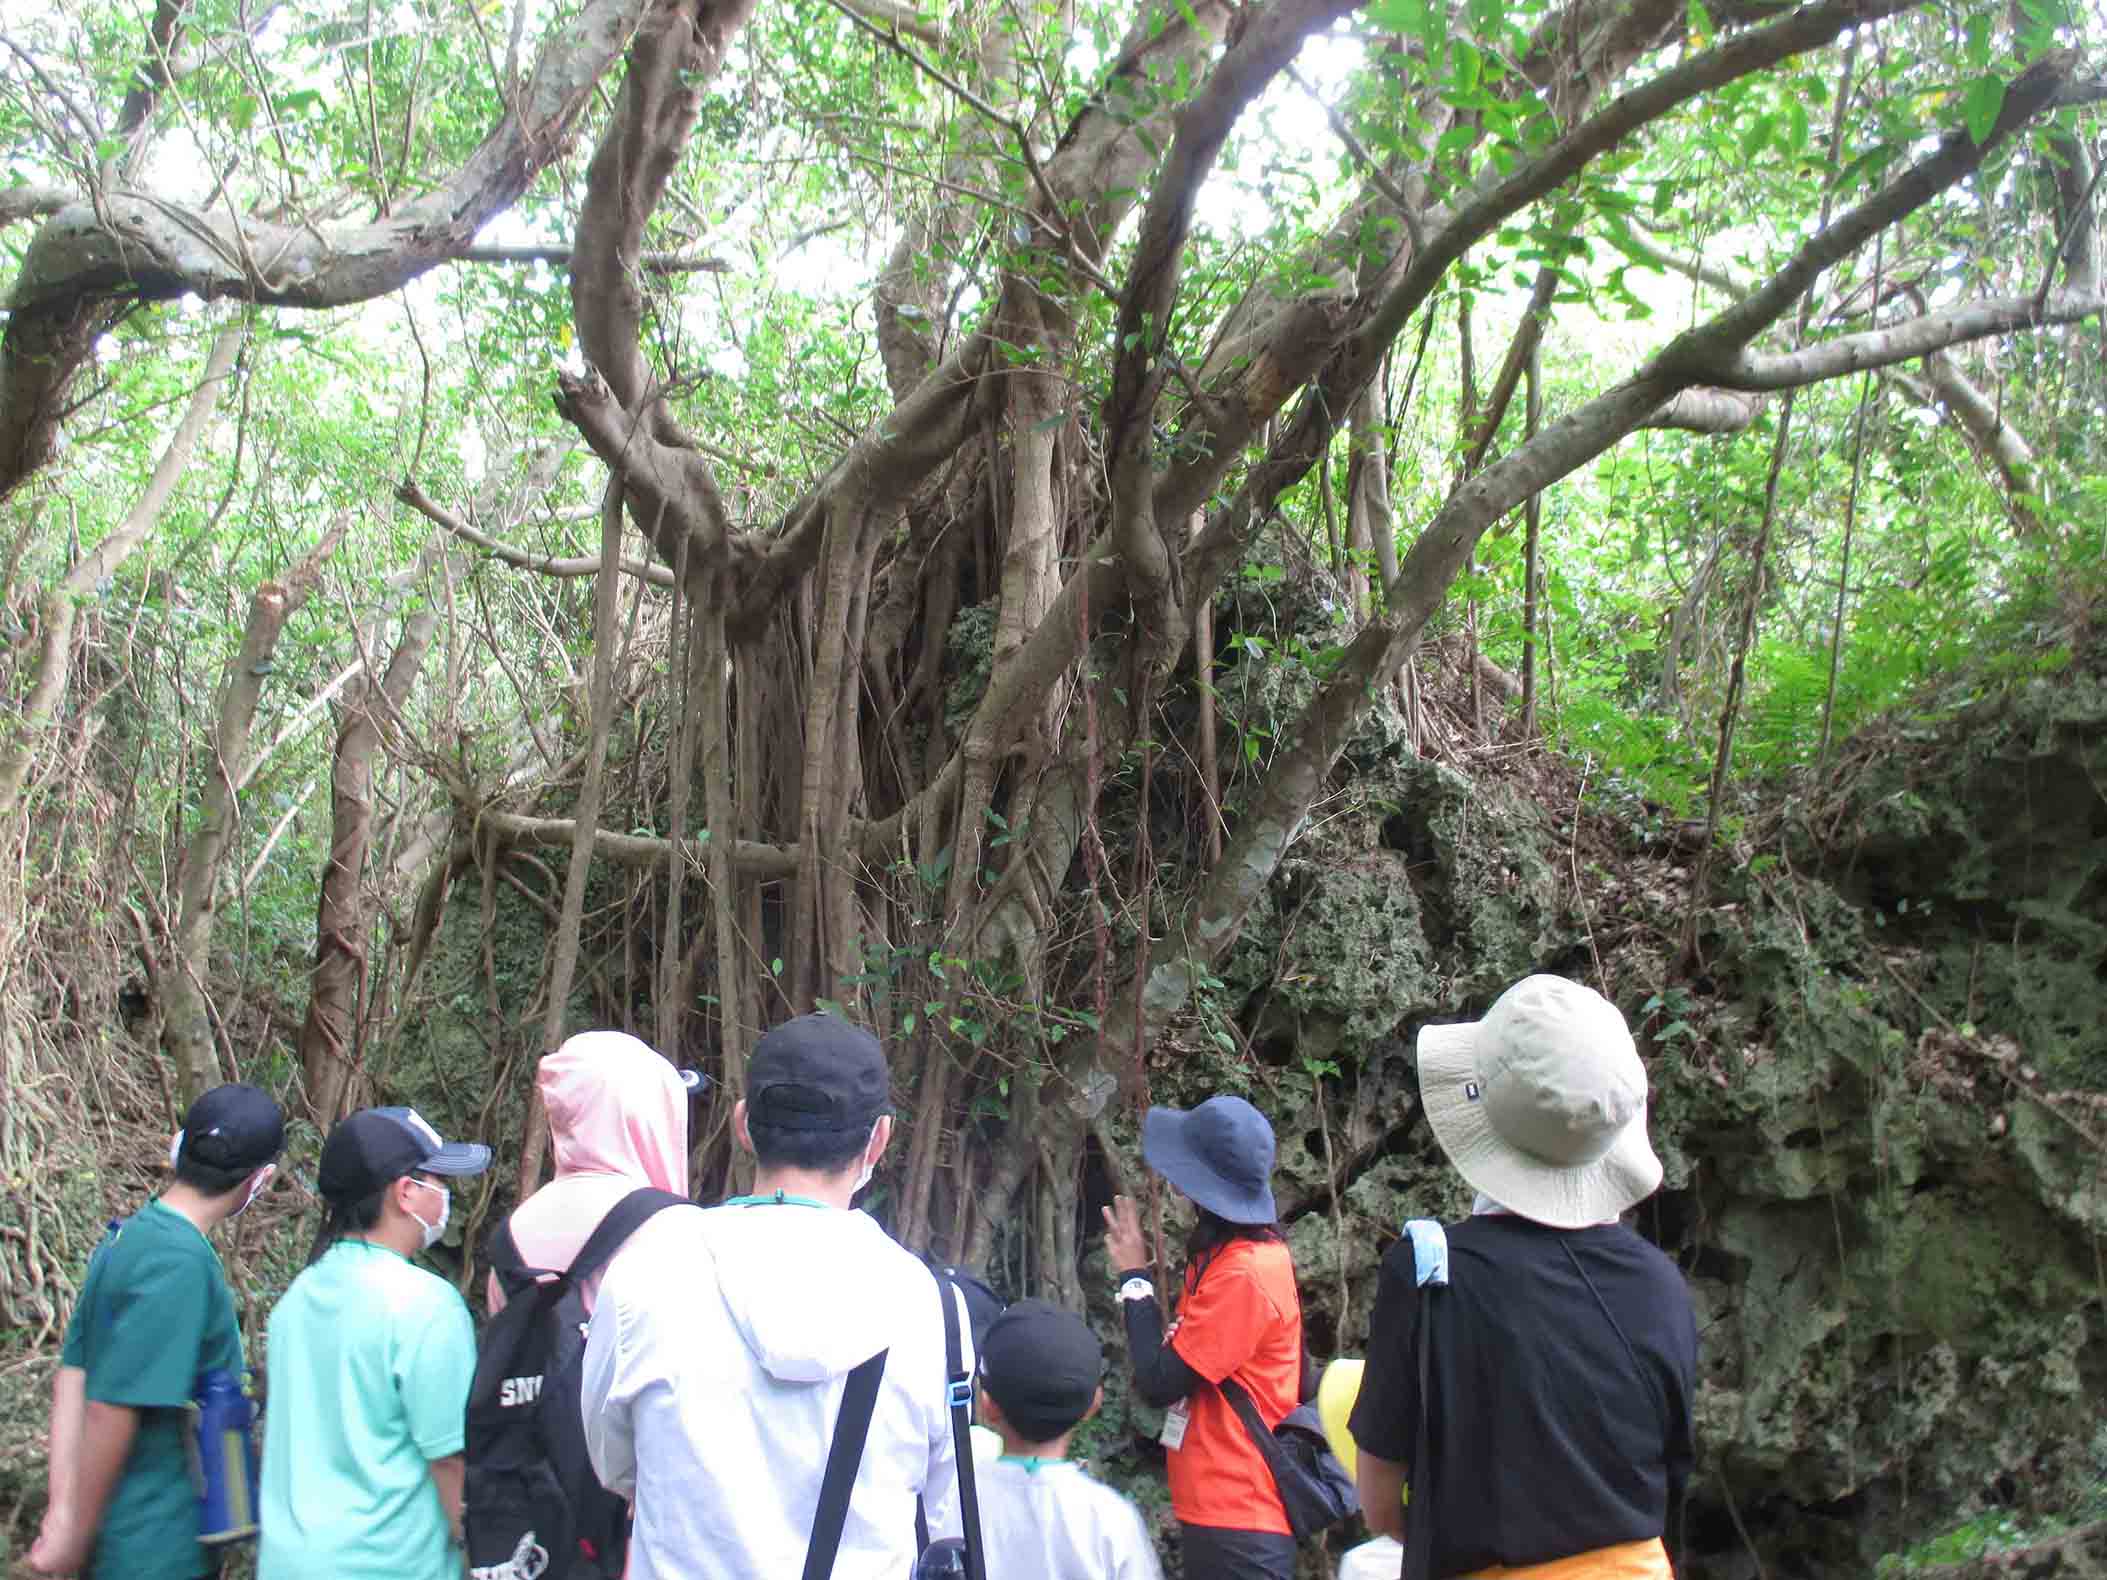 “Learning about the Nature of Okinawa through Fieldwork in Forest”, NPO Nature Experience School